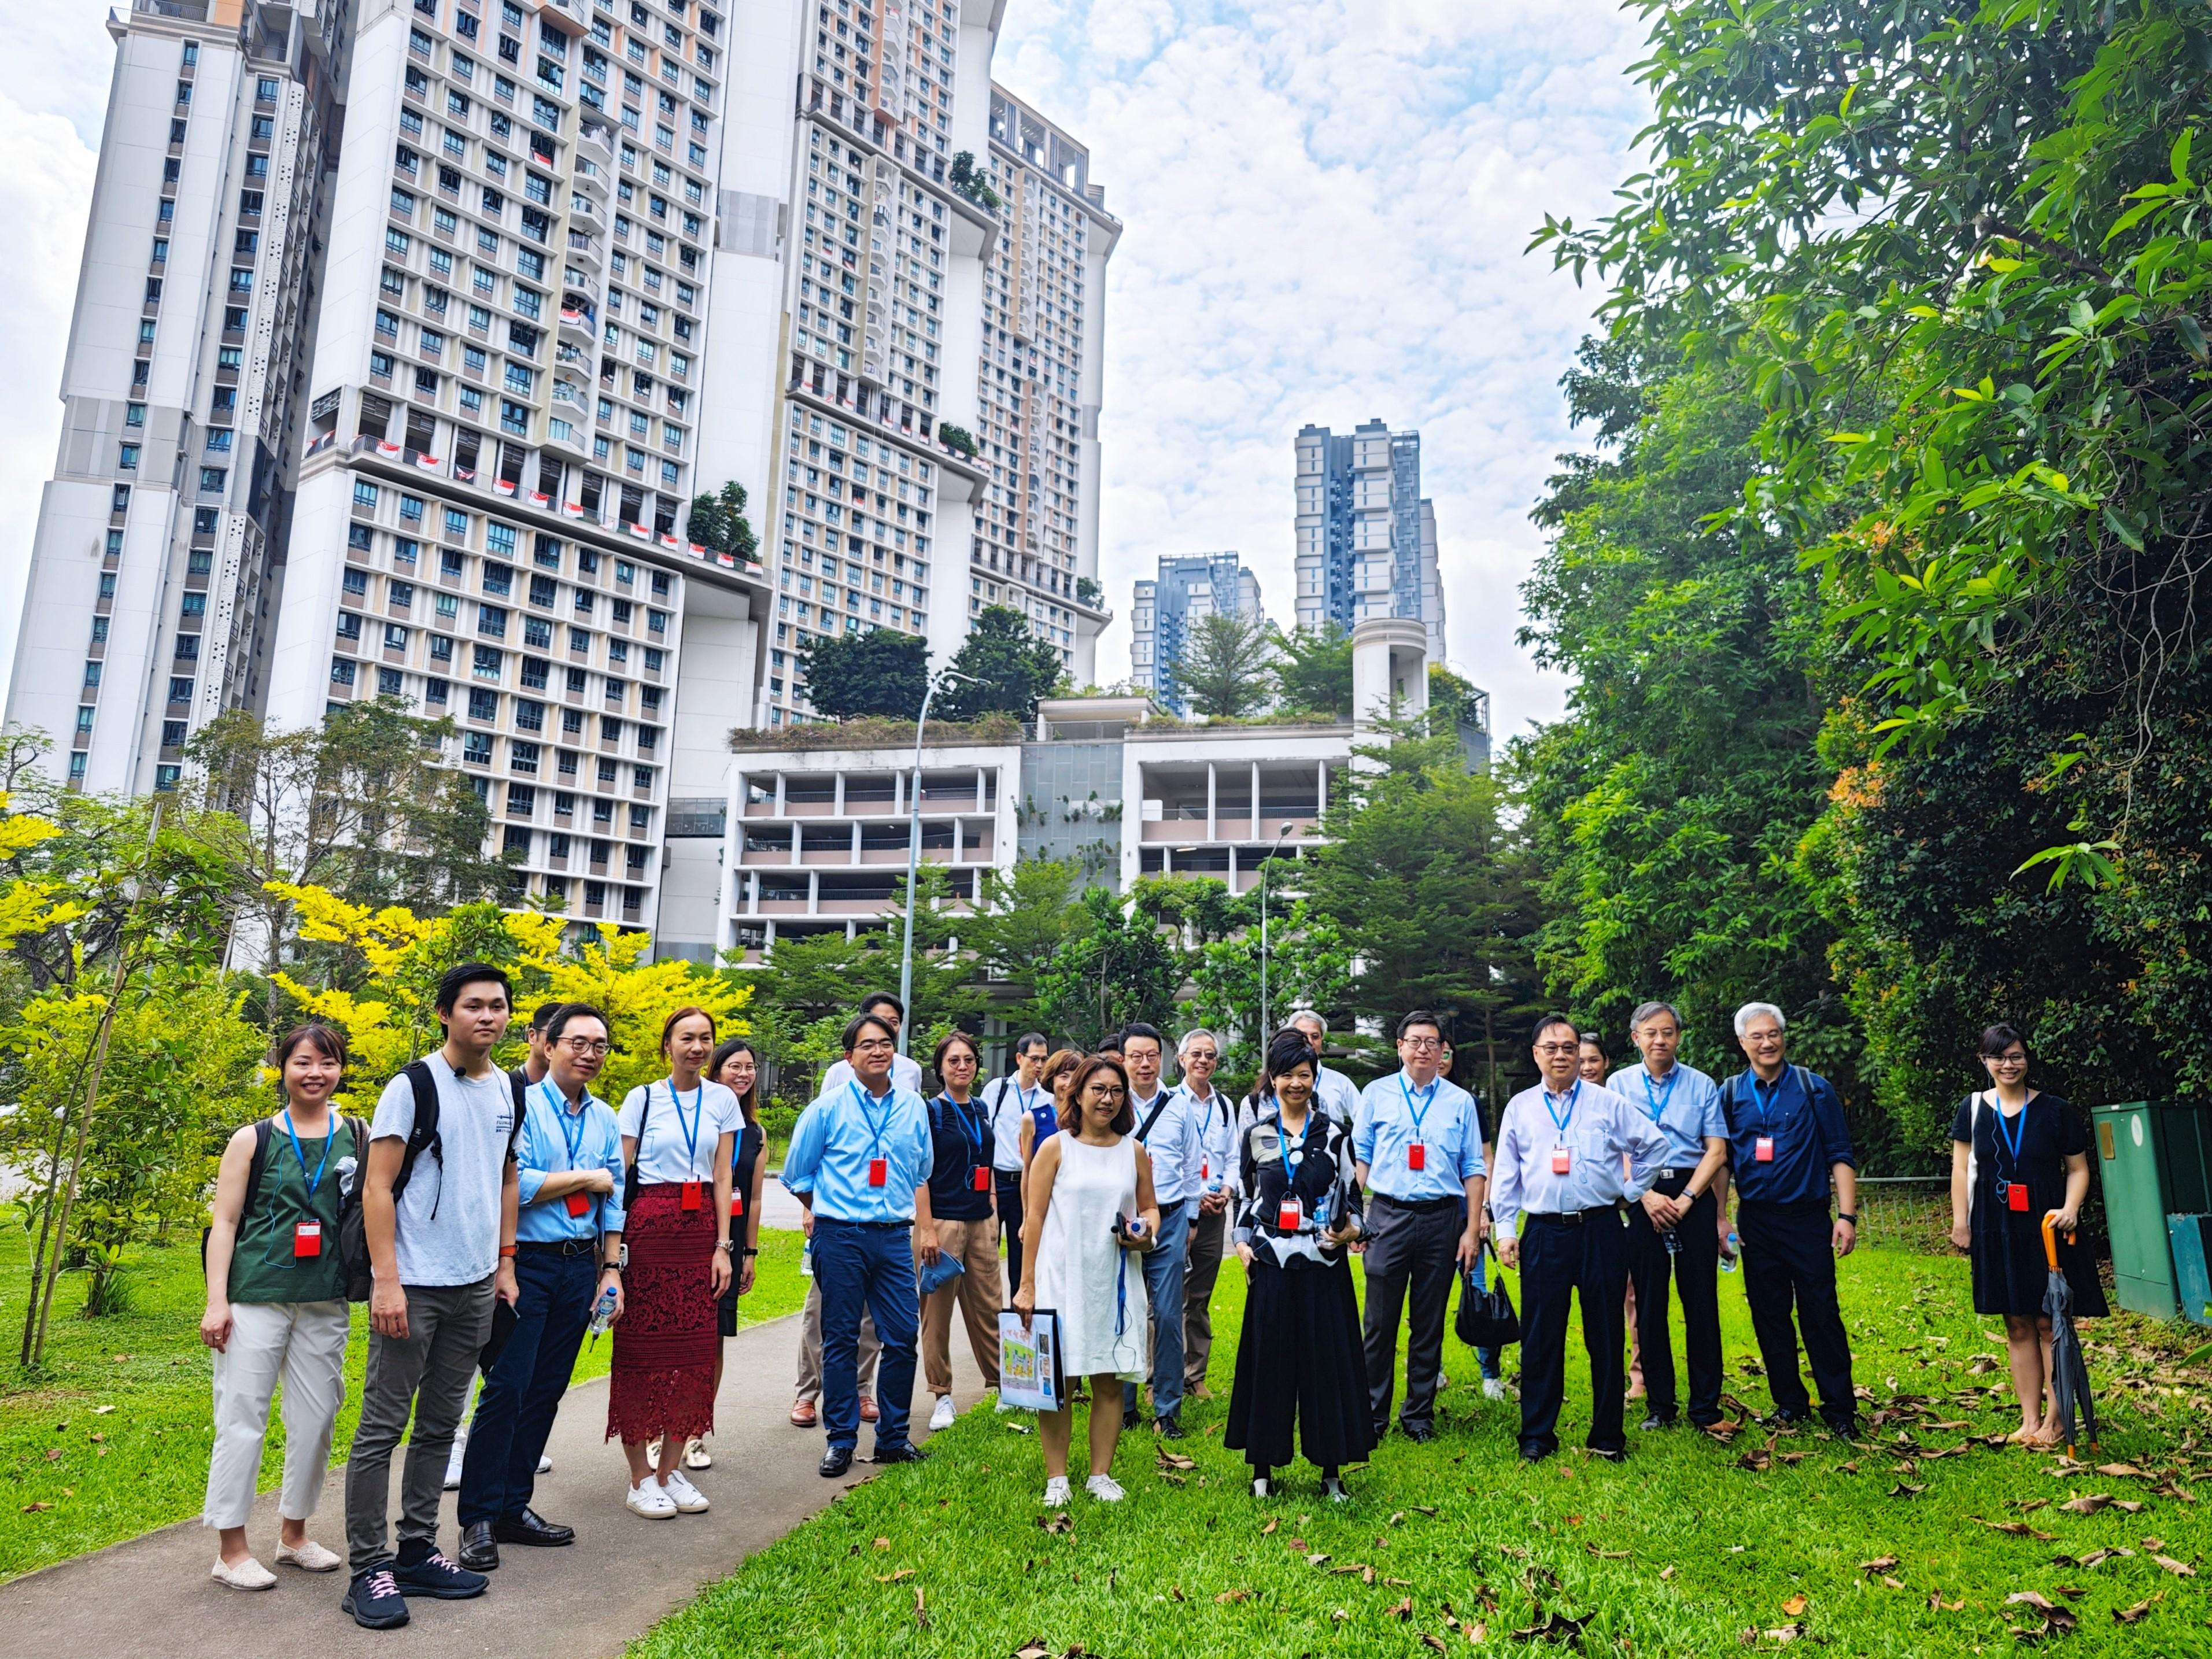 The Secretary for Housing, Ms Winnie Ho, began her visit to Singapore yesterday (August 22). She met with local government officials to exchange views in areas such as housing policies, innovative construction technologies and green building. Photo shows Ms Ho (first row, right) visiting a public housing project, SkyVille@Dawson, this morning (August 23).